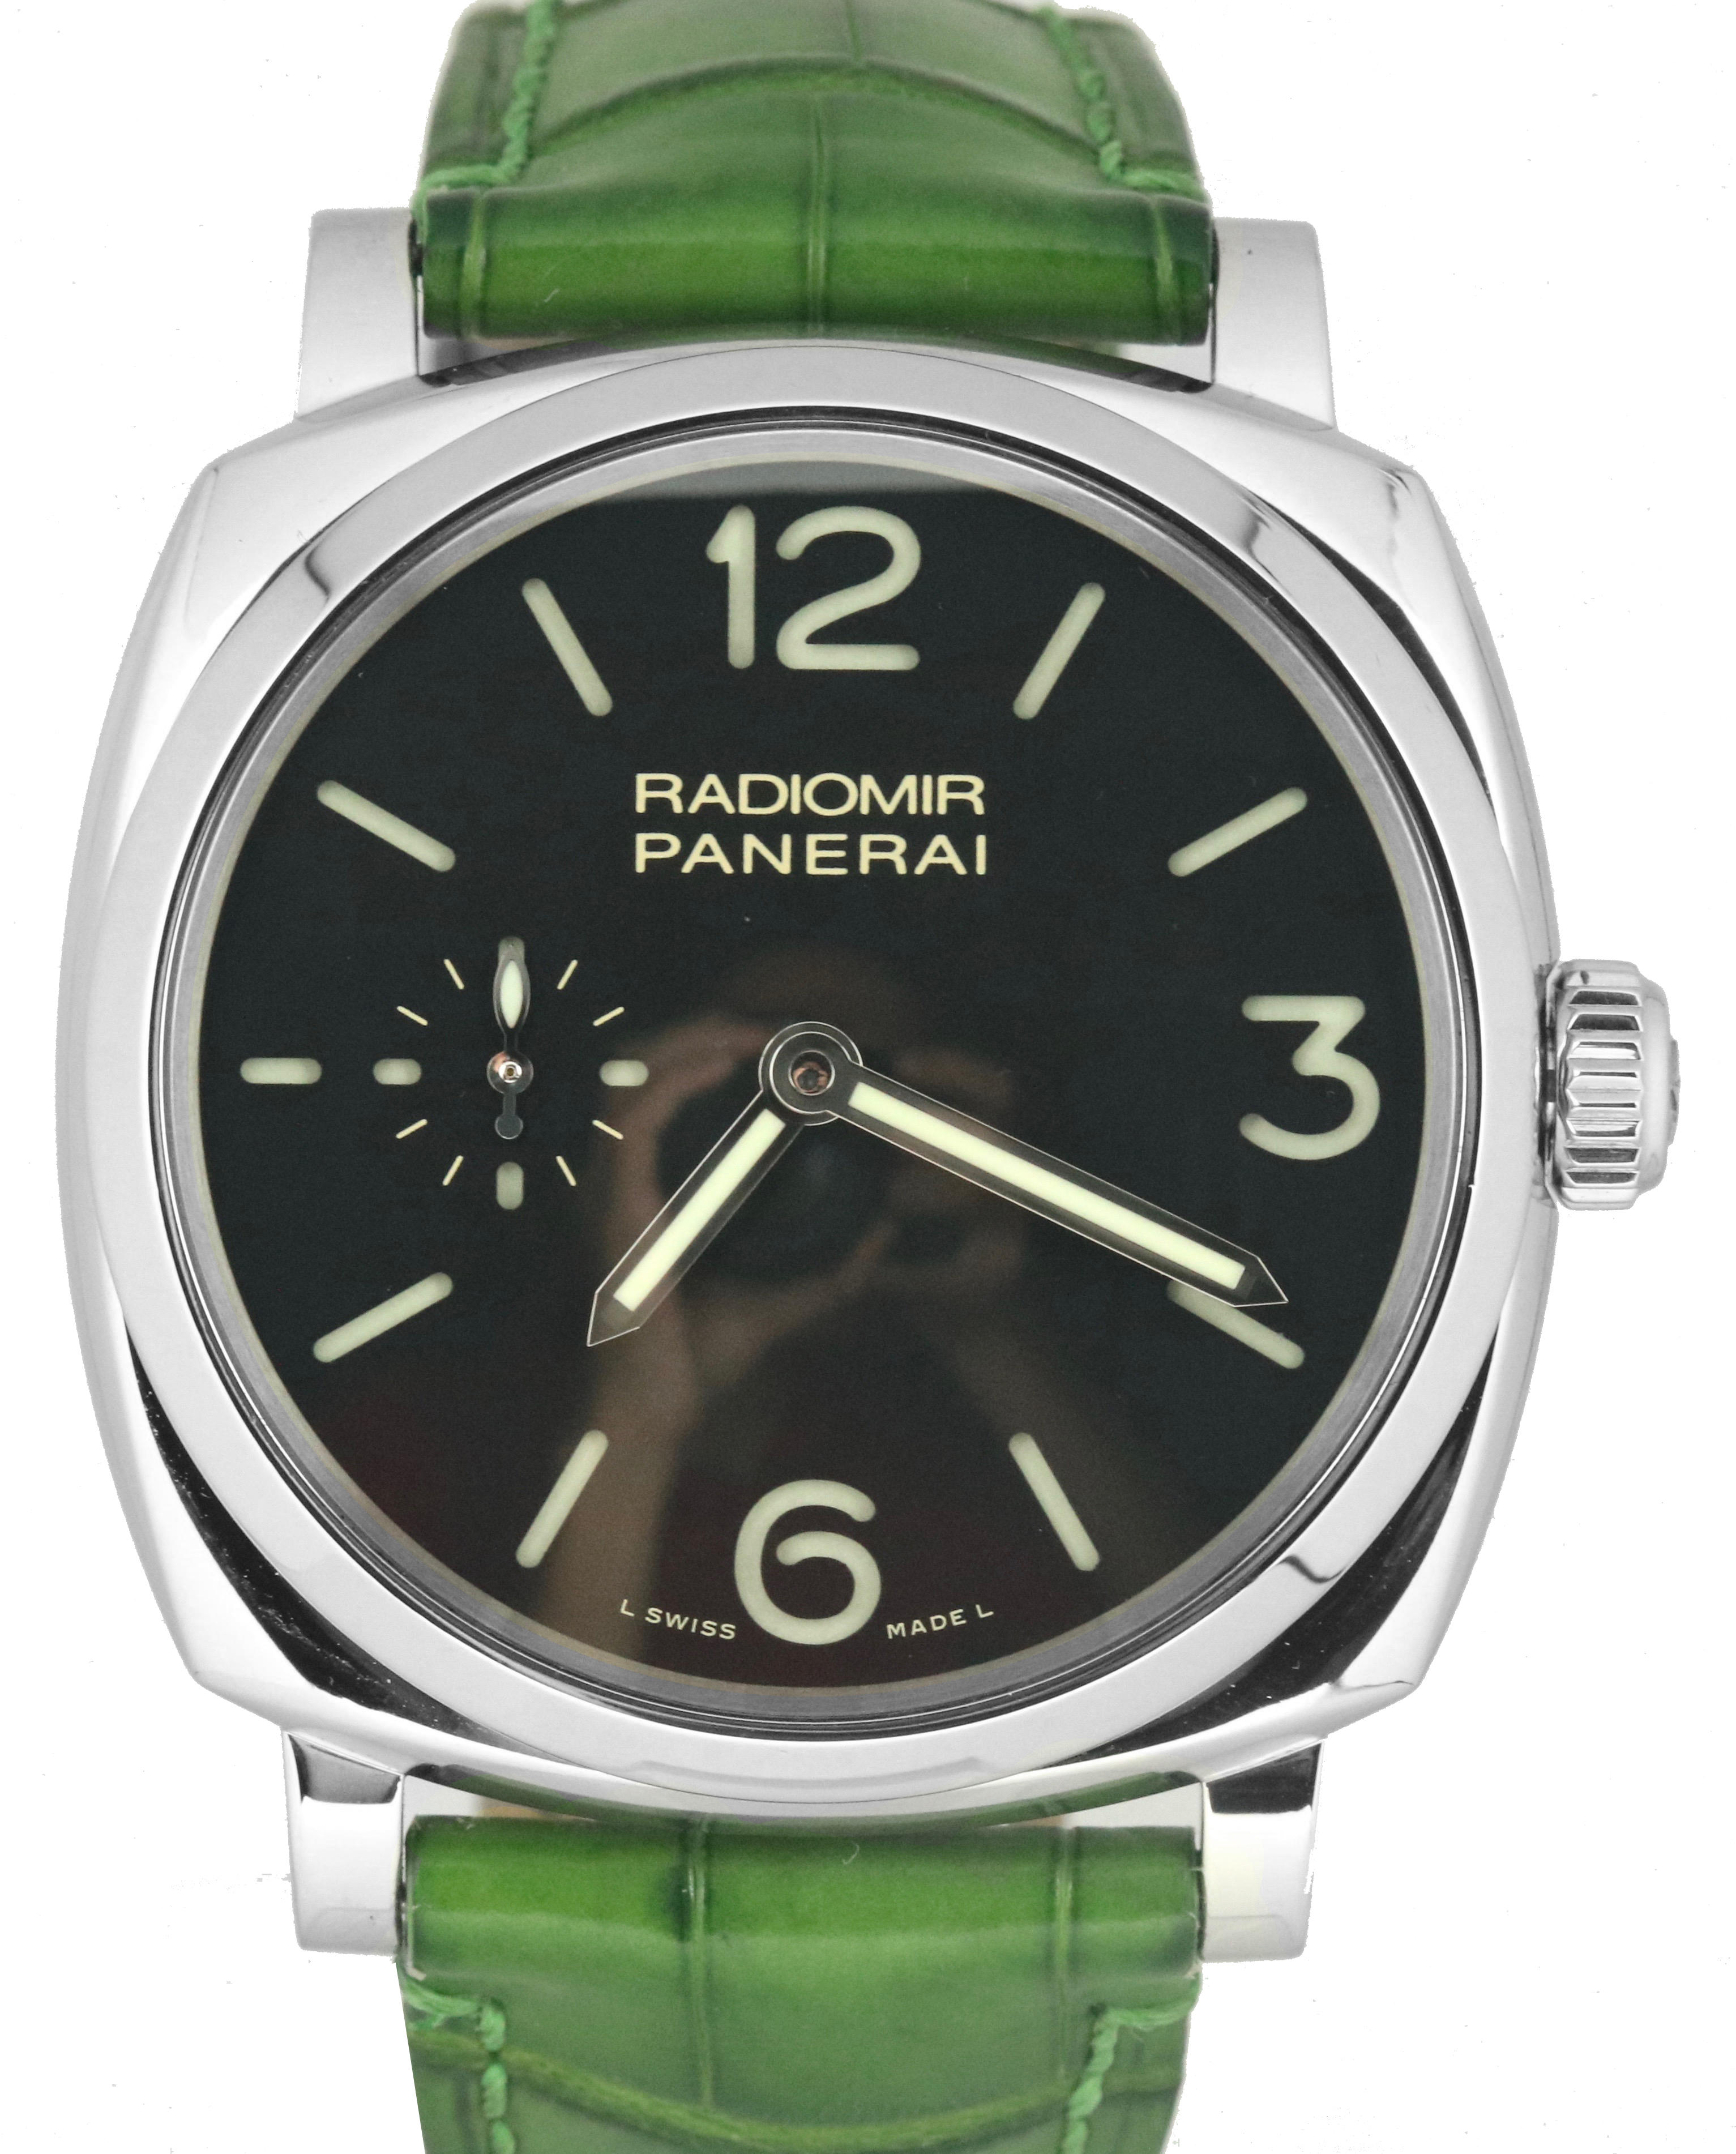 Panerai PAM574 Collectors Coins & Jewelry Lynbrook (516)341-7355